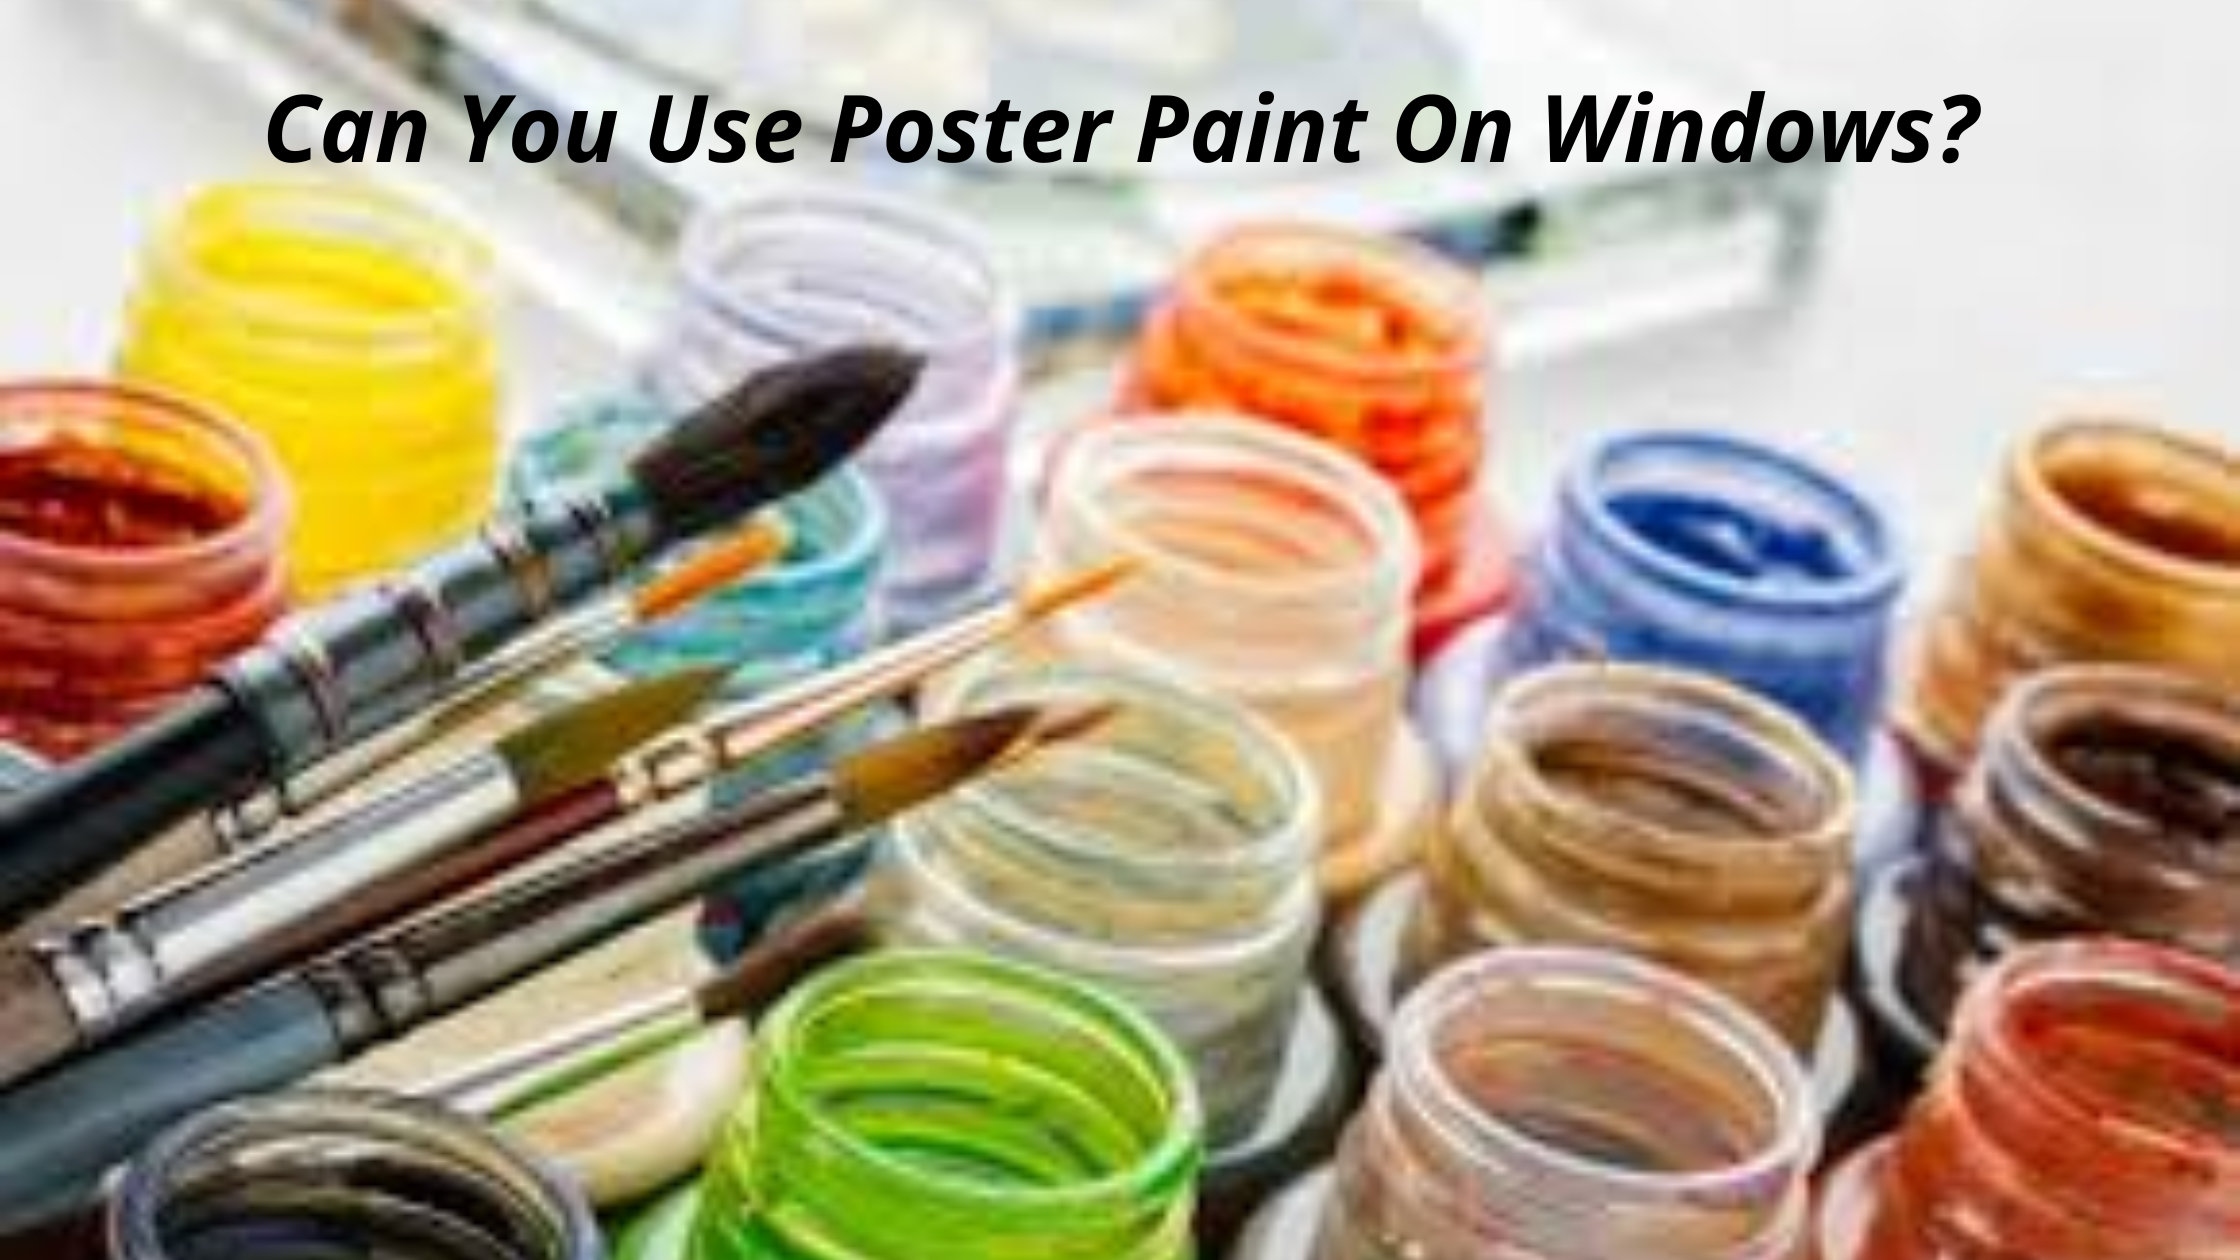 Can You Use Poster Paint On Windows?